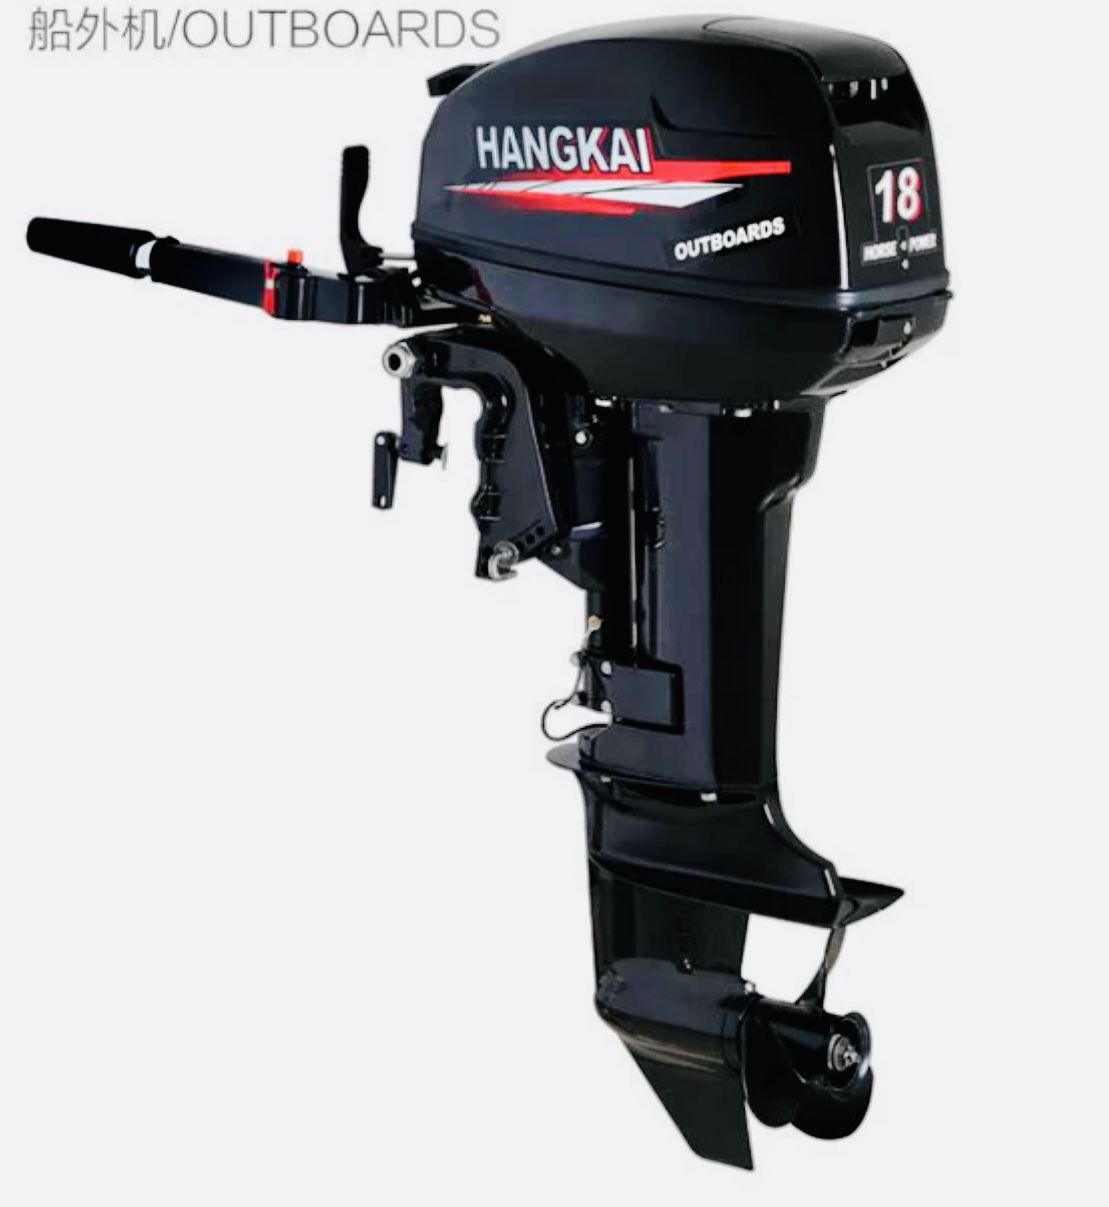 Outboard Motor 18 PH 